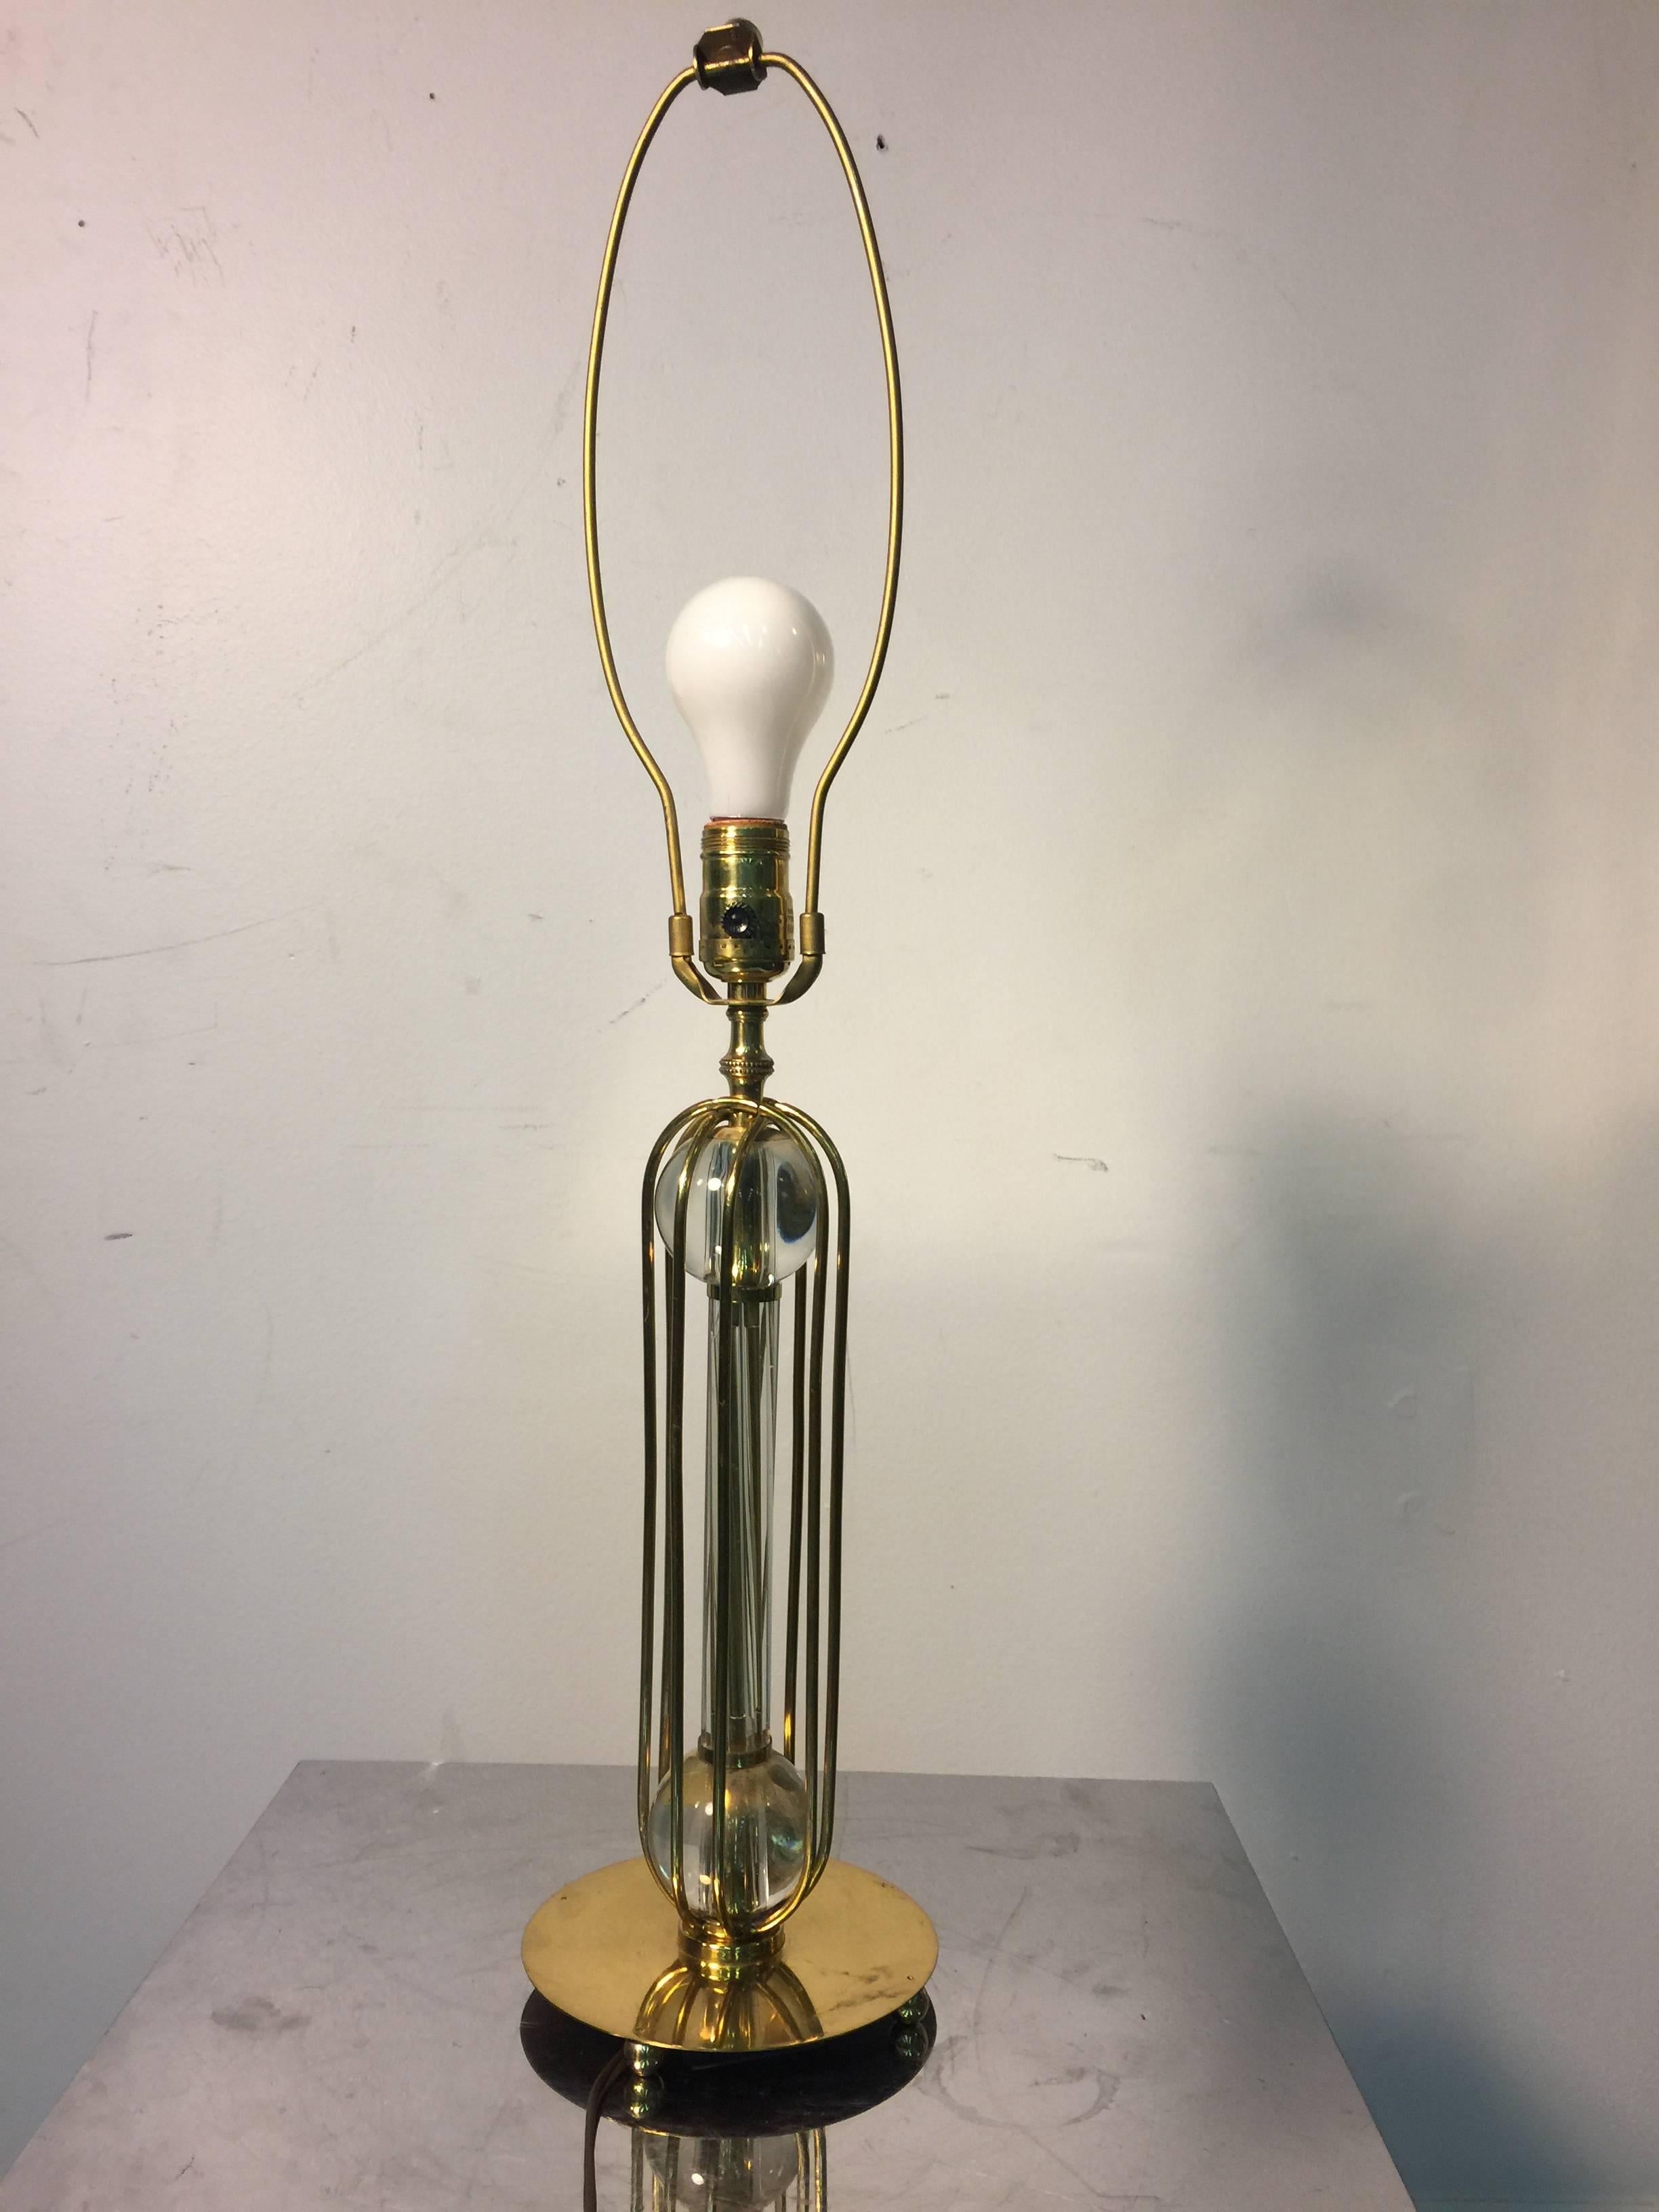 Beautiful Brass Table Lamp with Glass Ball and Cage Design In Good Condition For Sale In Mount Penn, PA